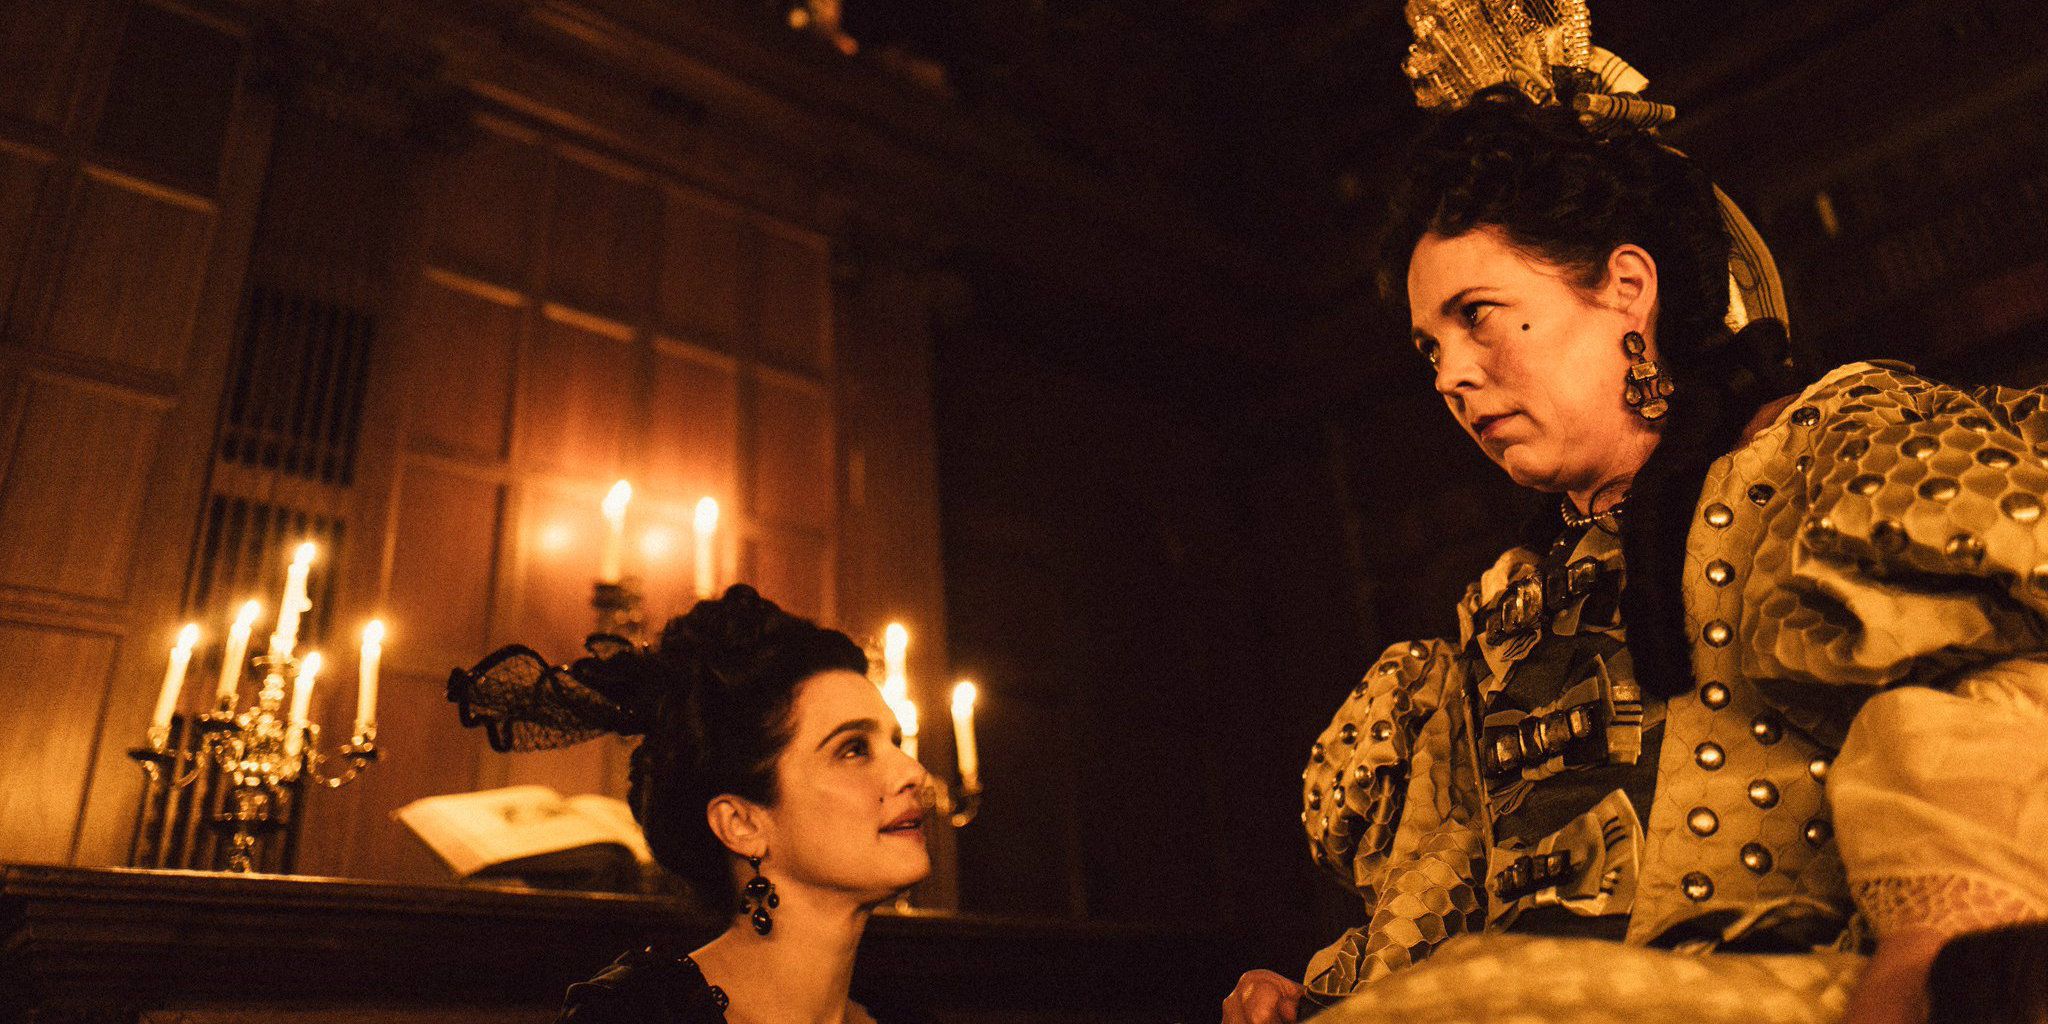 Rachel Weisz looks up at Olivia Colman in The Favourite